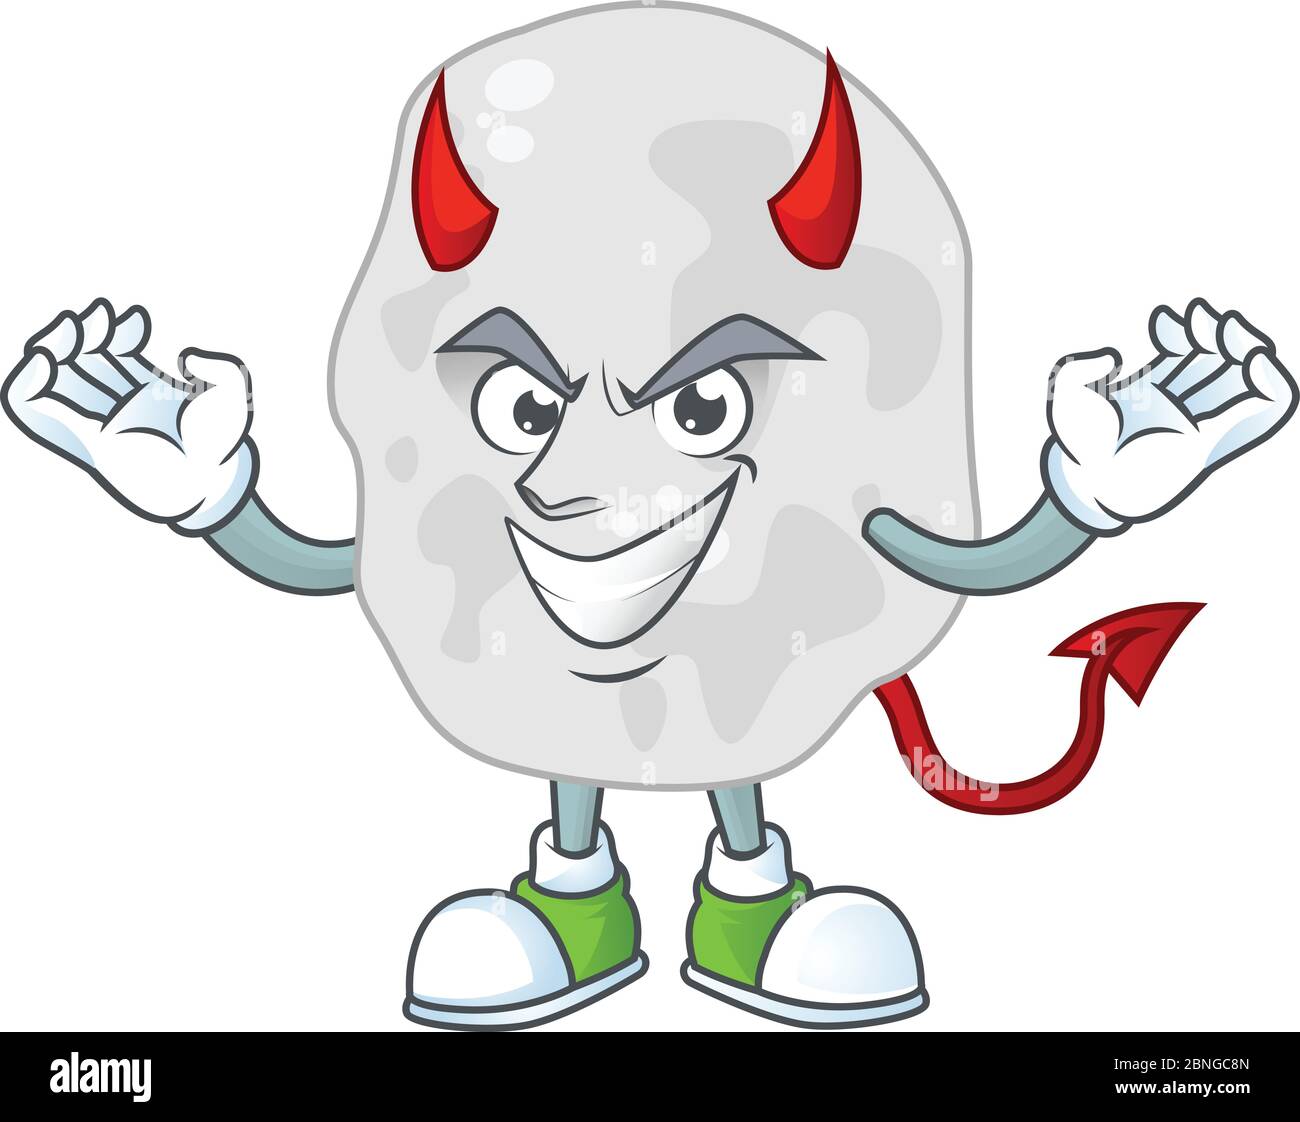 A cartoon image of planctomycetes as a devil character Stock Vector